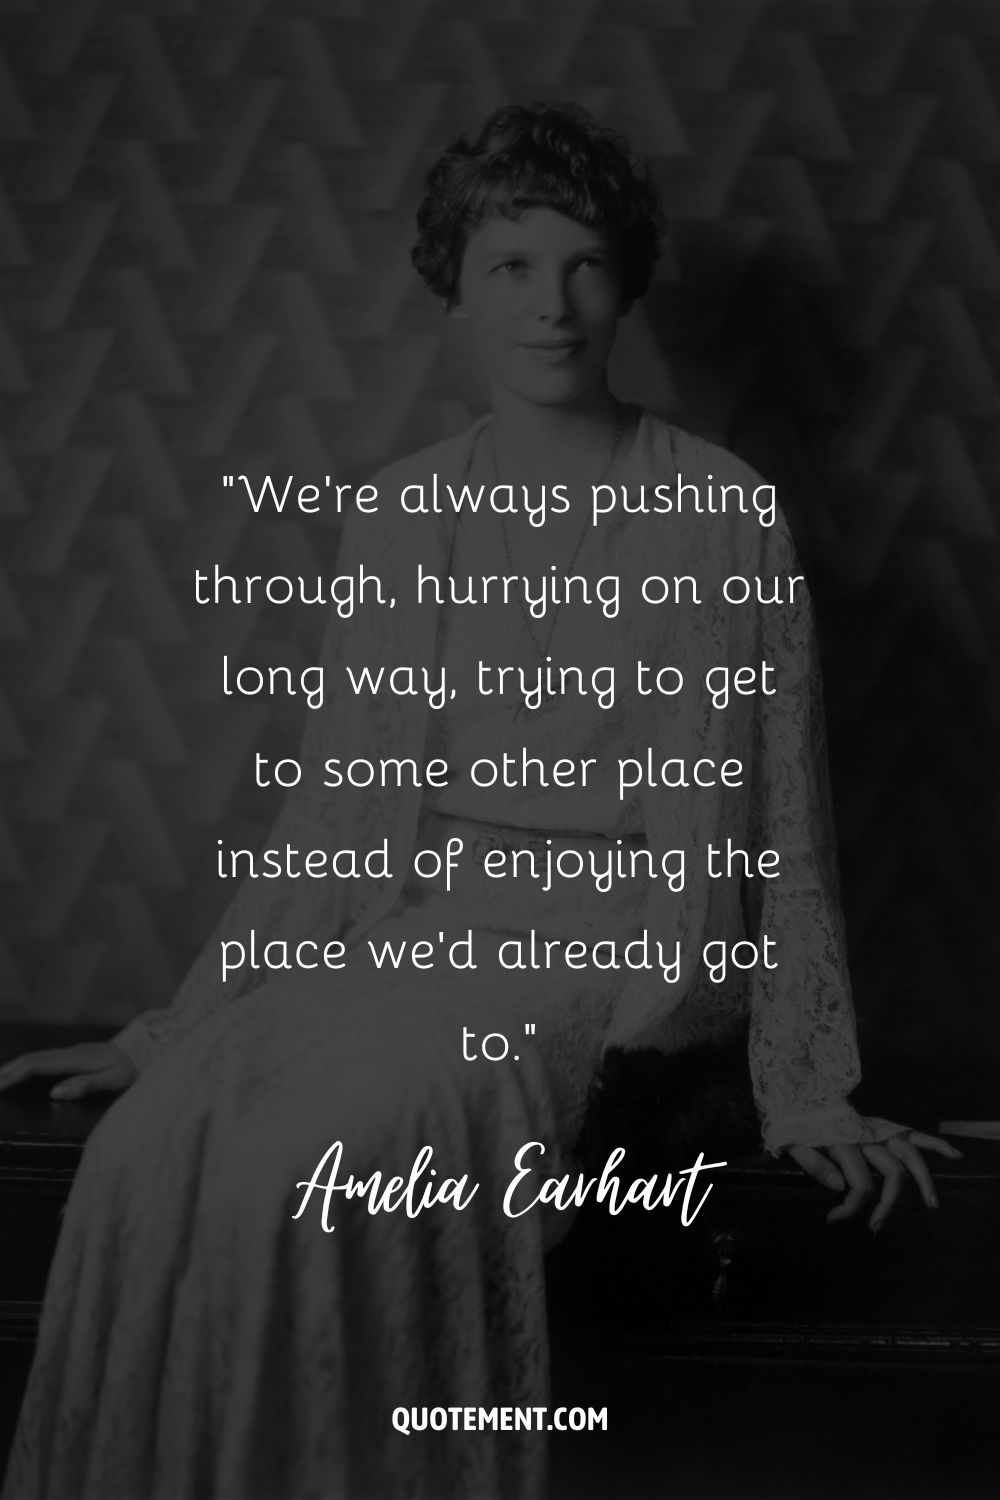 “We’re always pushing through, hurrying on our long way, trying to get to some other place instead of enjoying the place we’d already got to.” ― Amelia Earhart, Last Flight